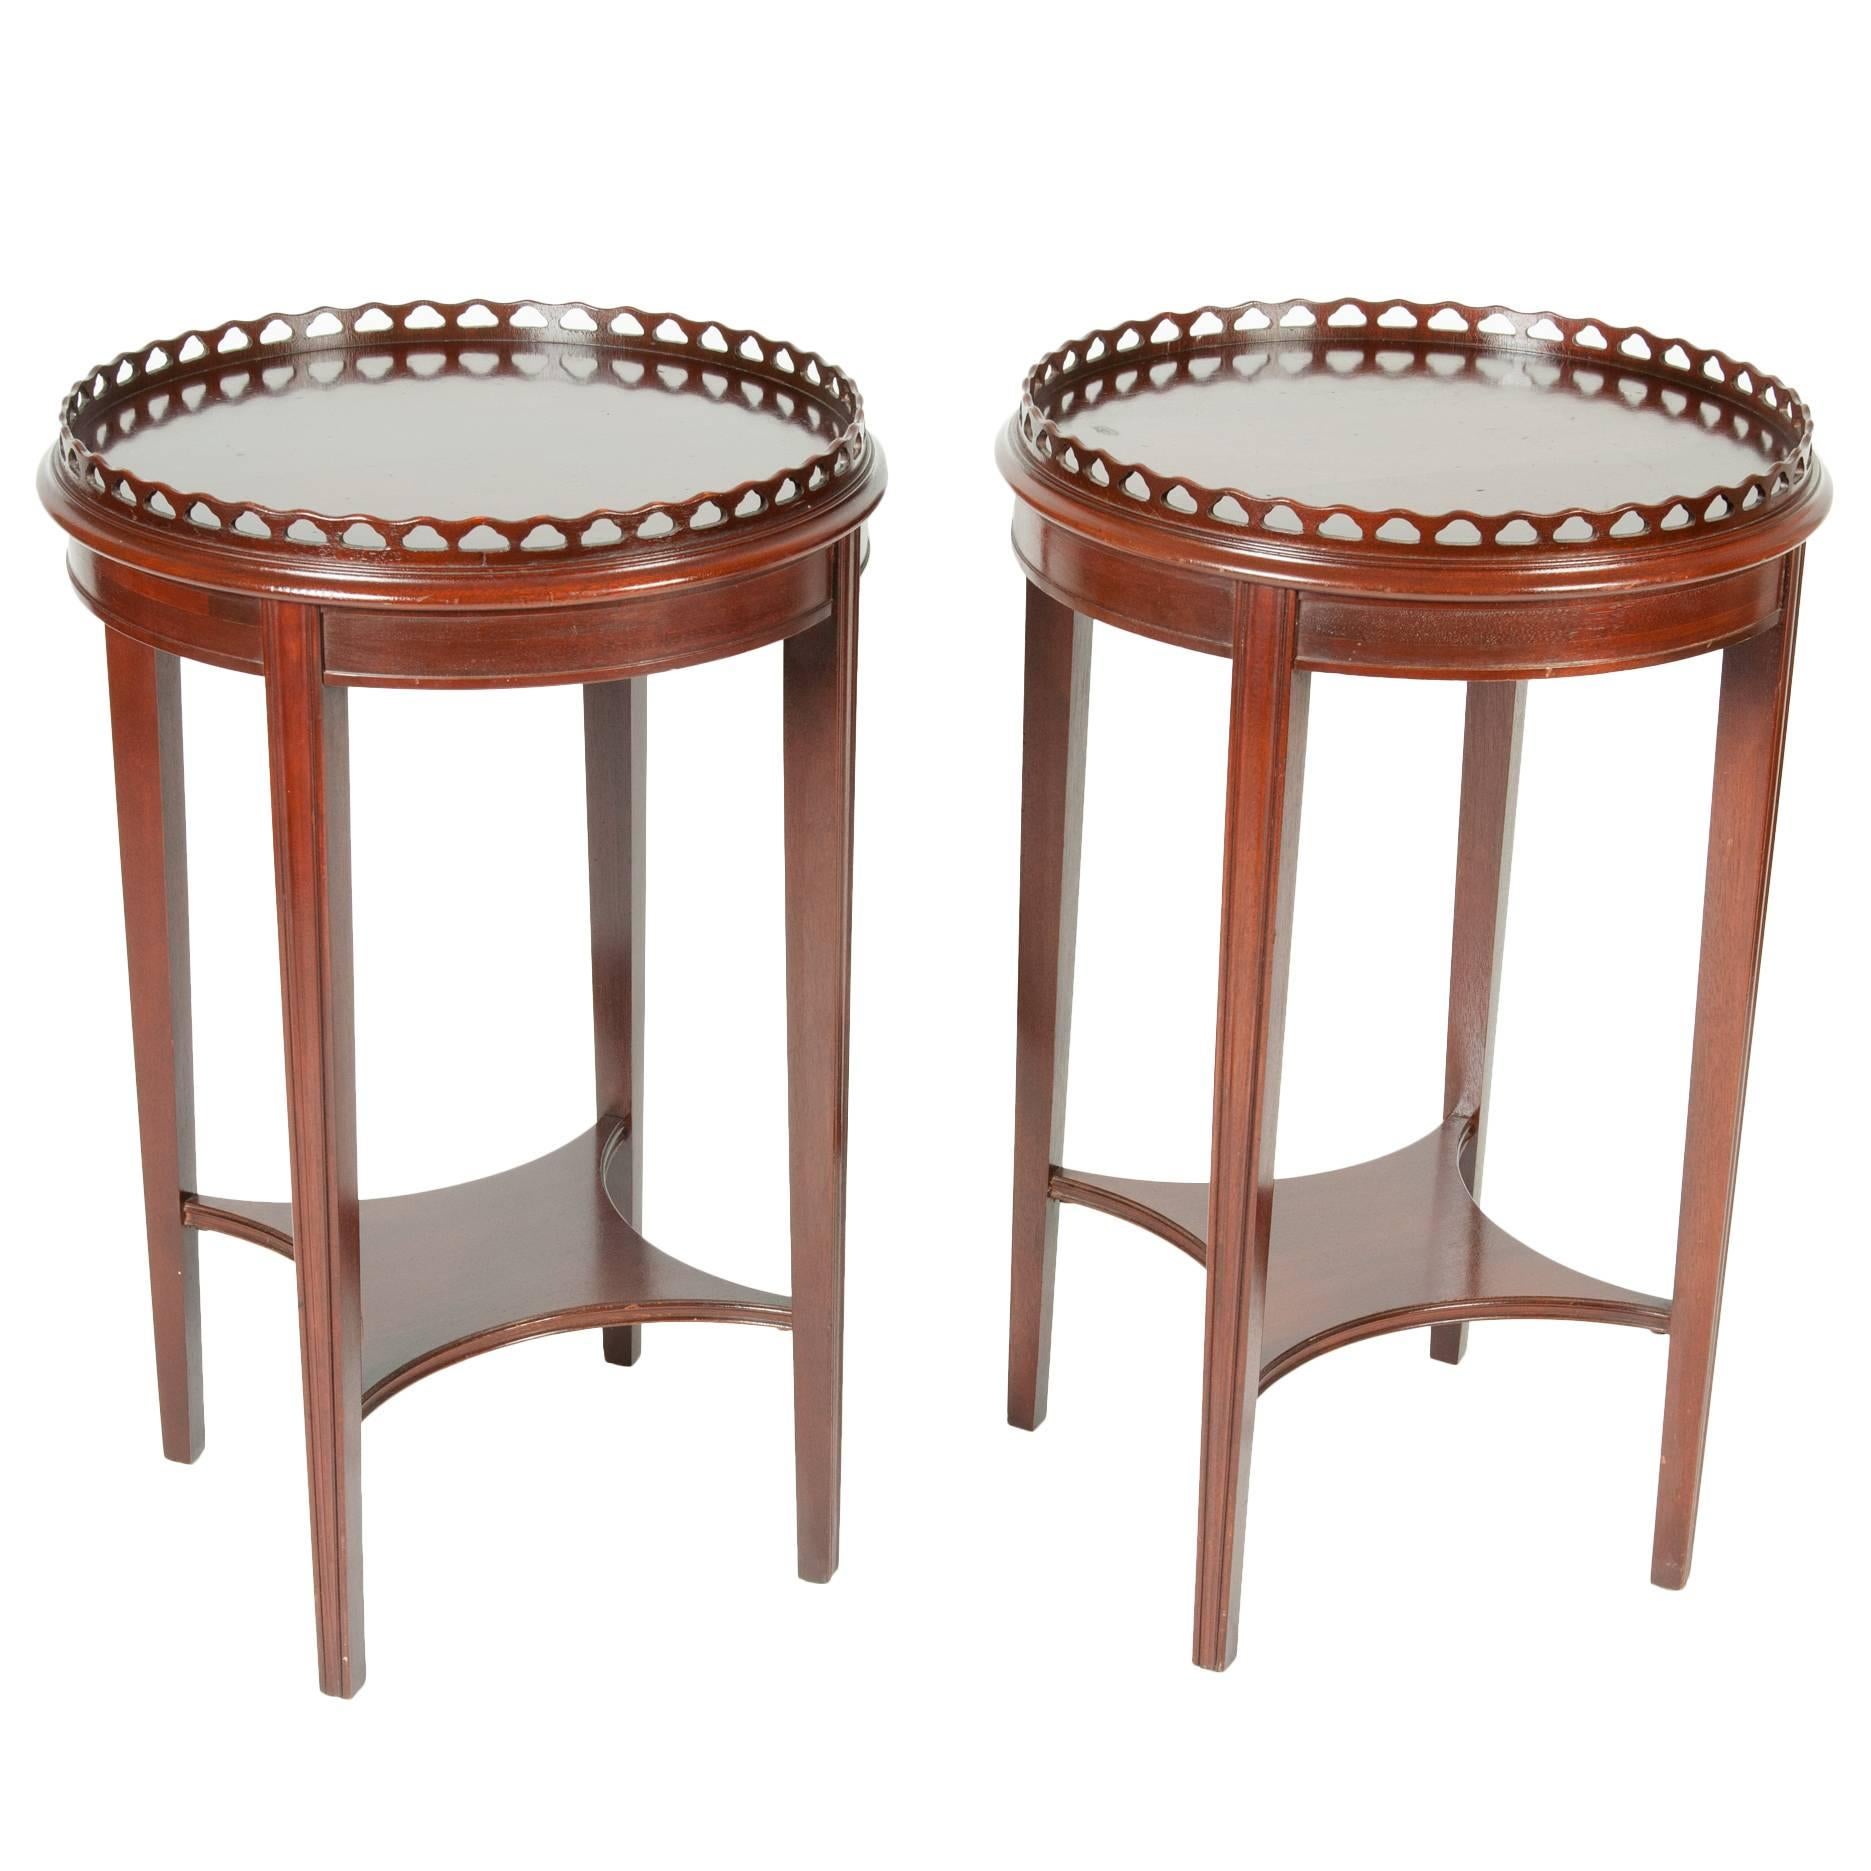 Antique Pair of Round Mahogany End Tables